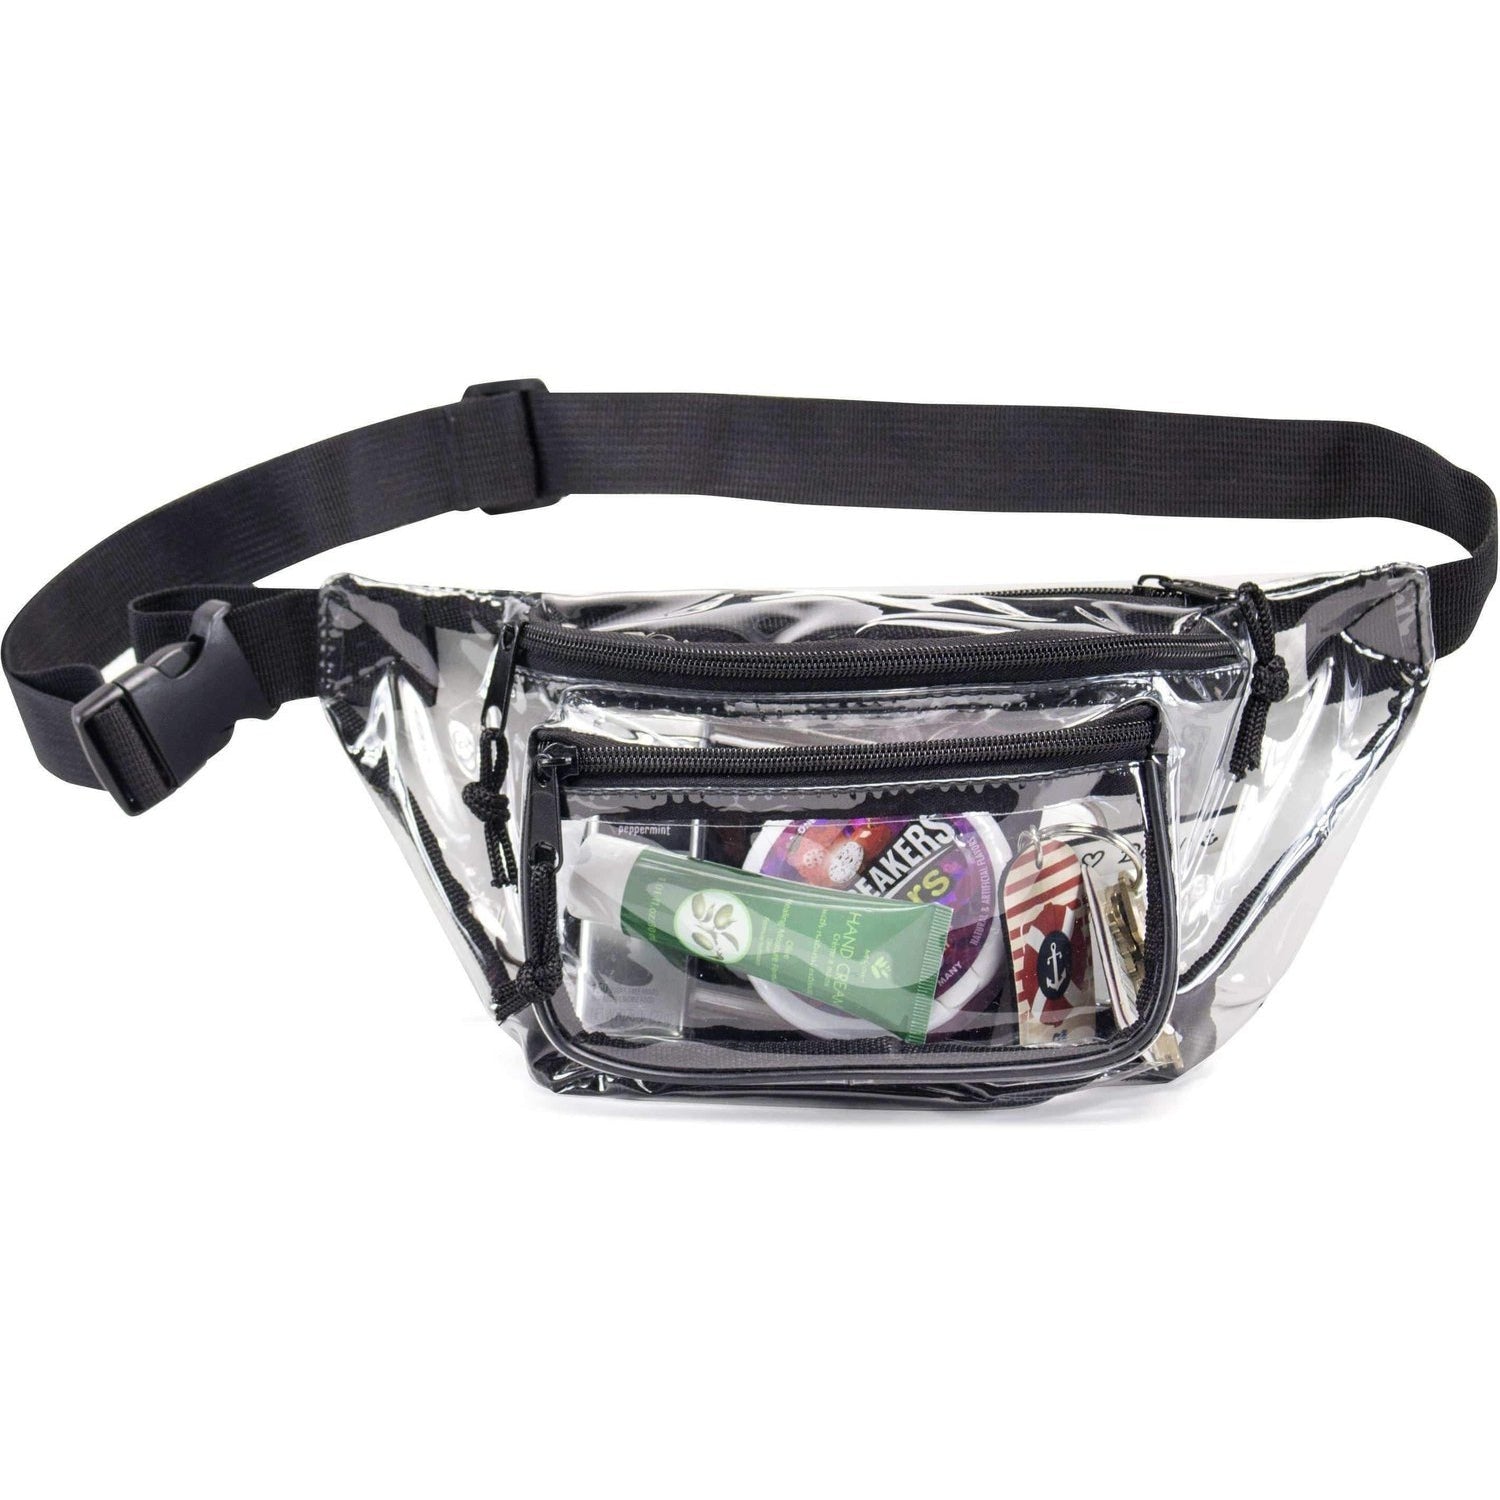 where to purchase a fanny pack